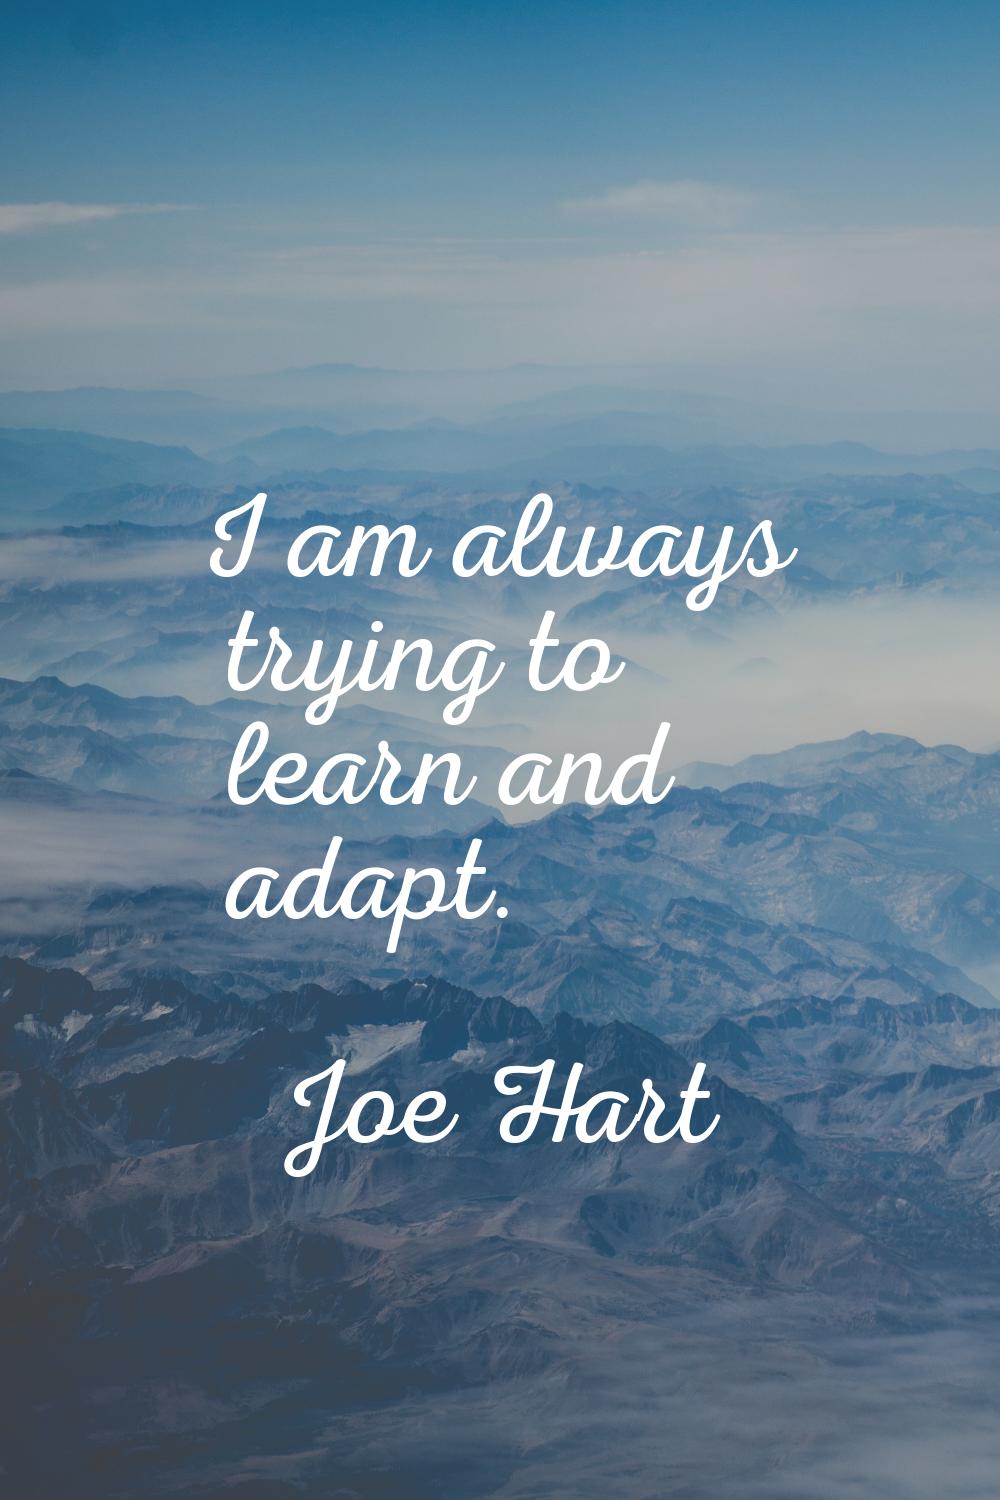 I am always trying to learn and adapt.